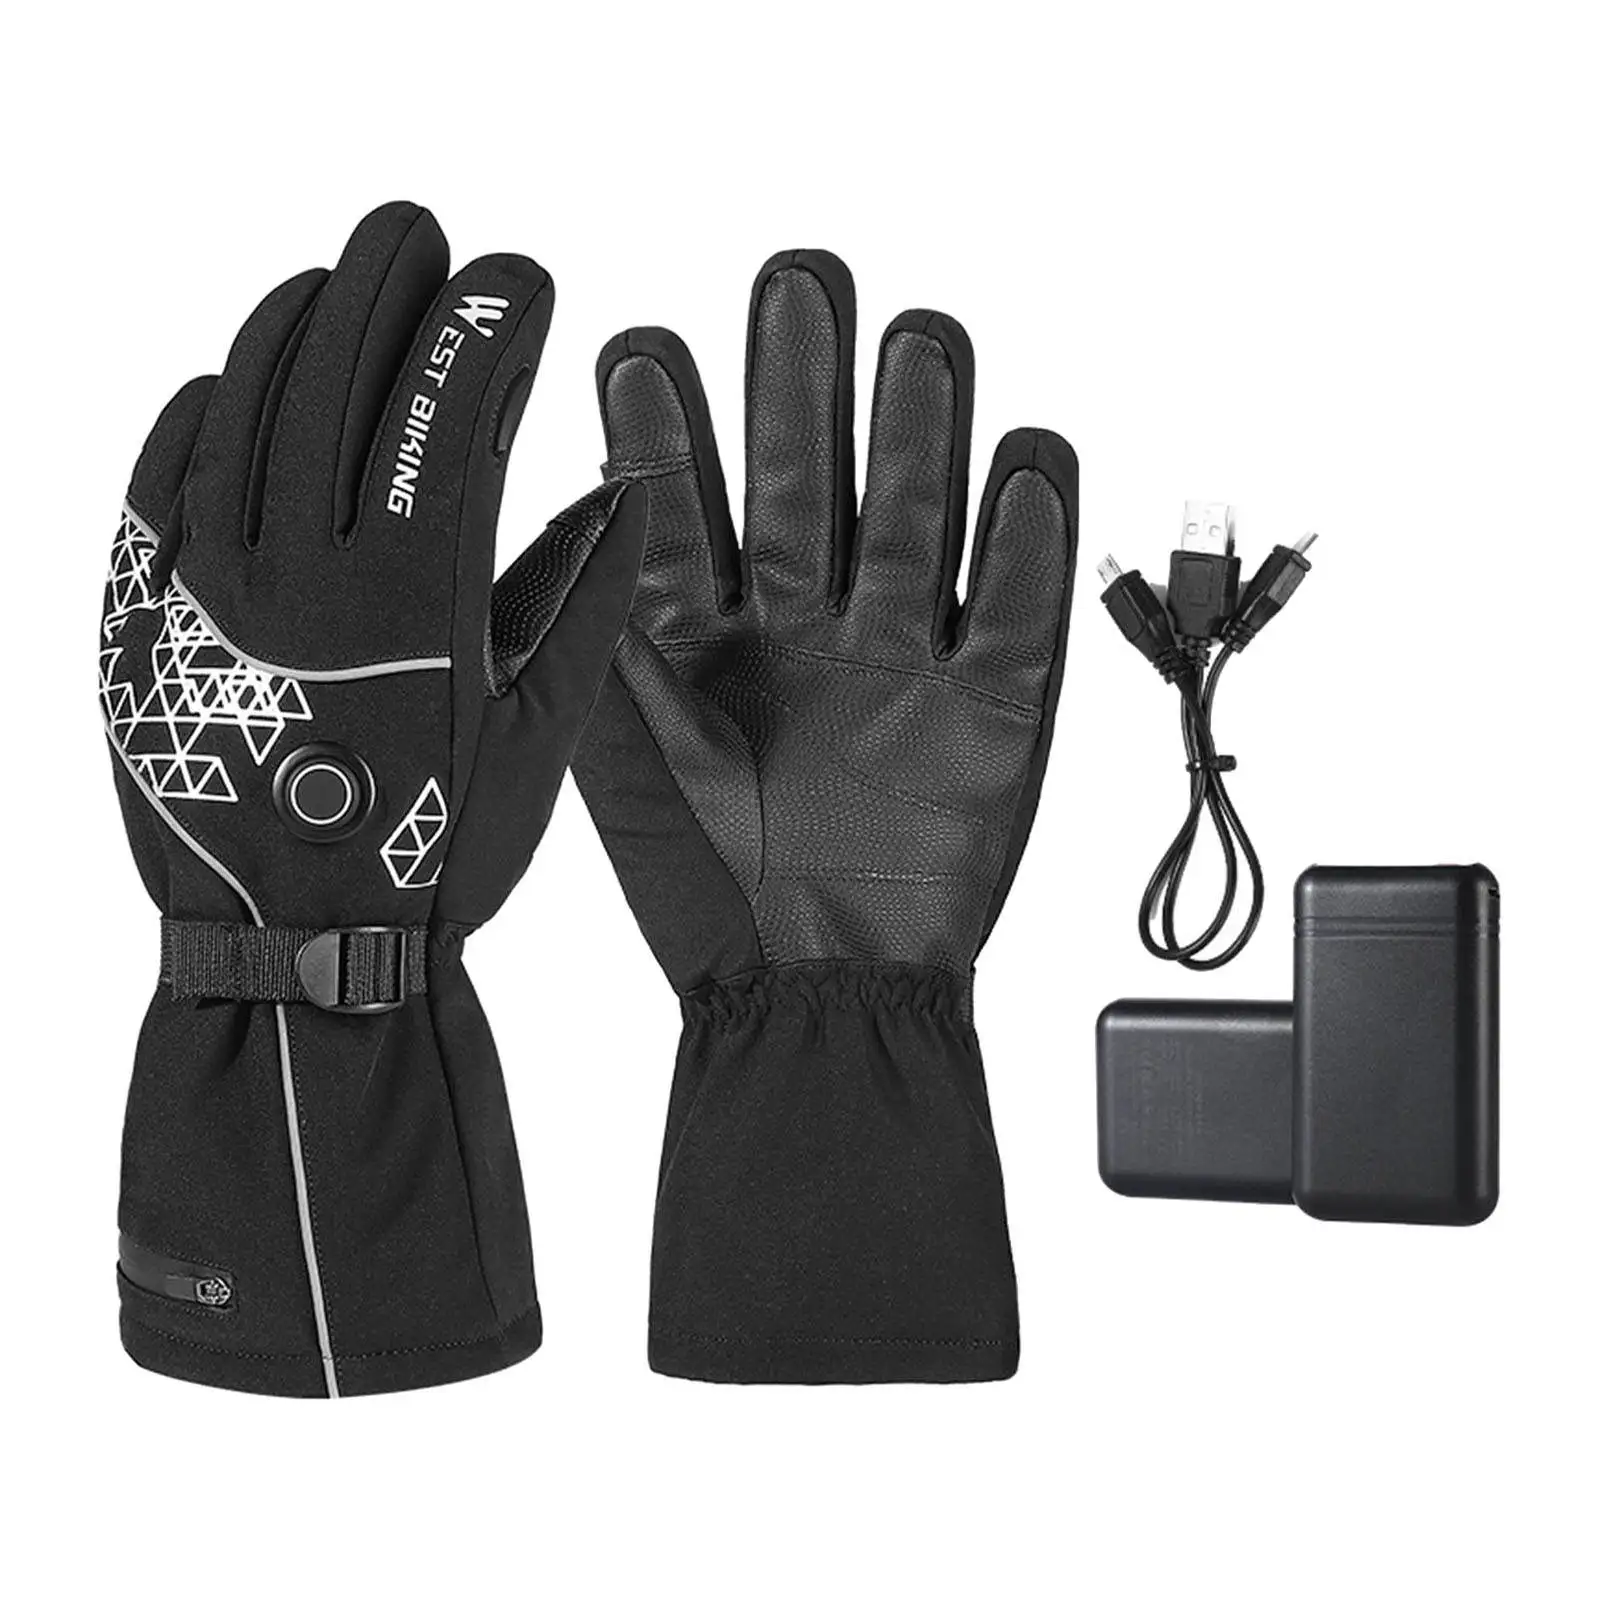 Heated Gloves Battery Powered Thermal Mitten for Motorcycle Fishing Outdoor Sports